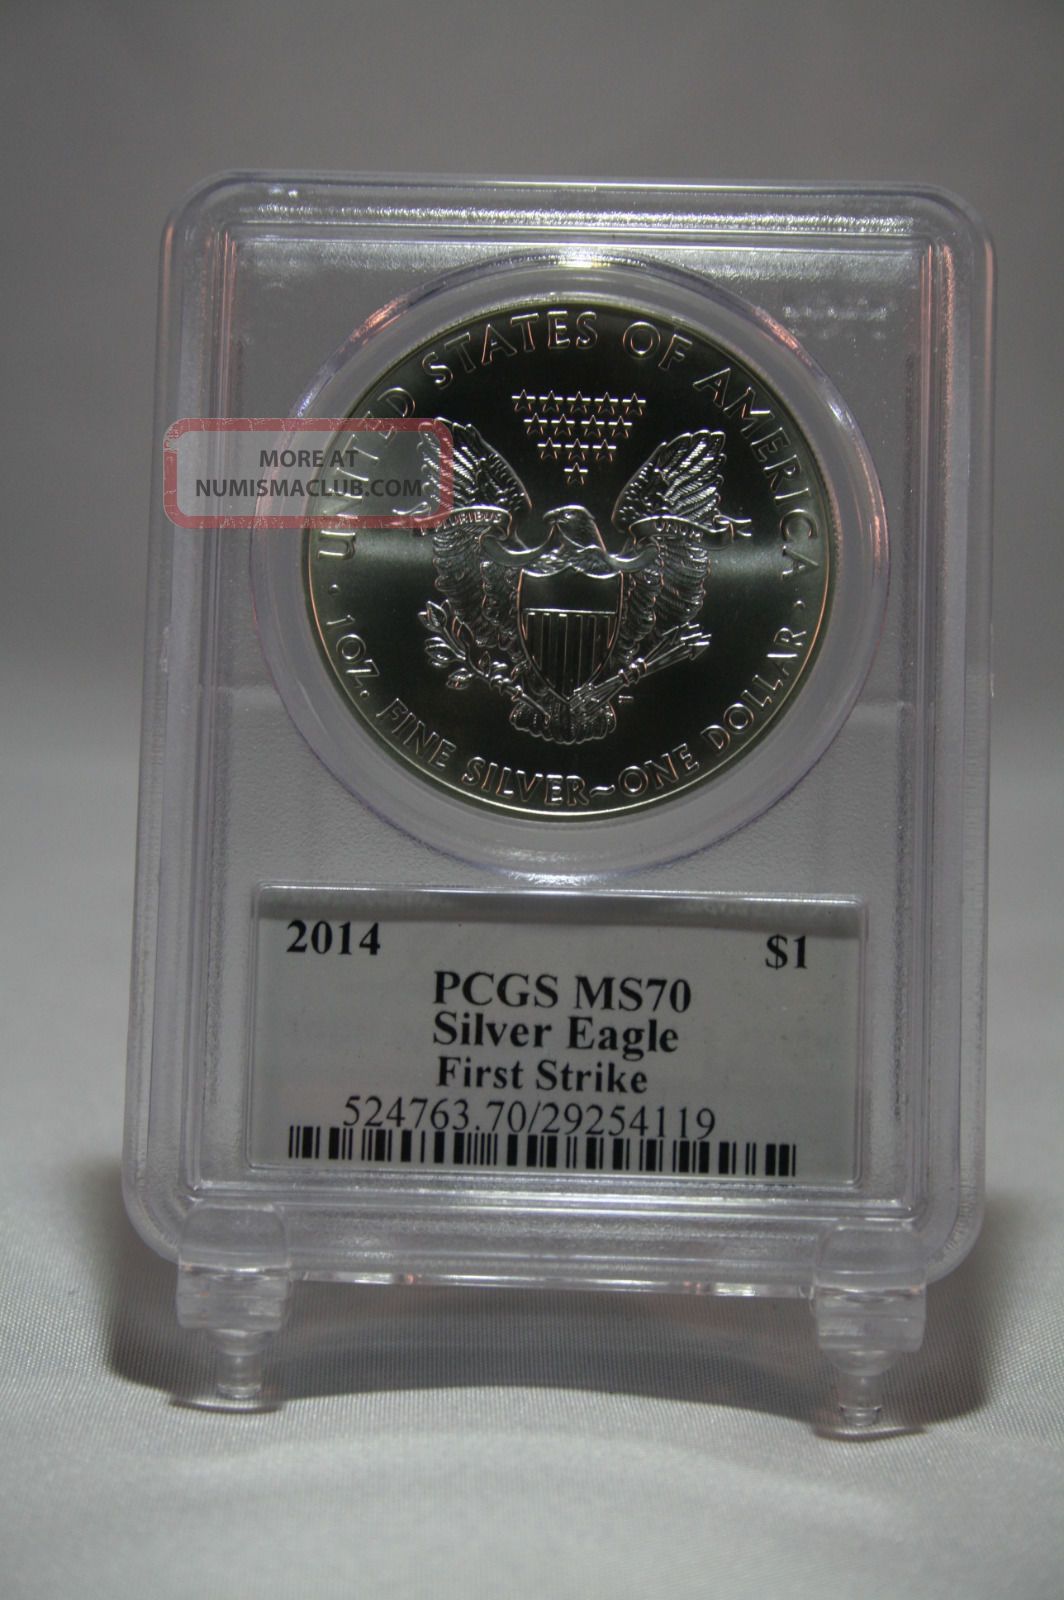 2014 Pcgs Ms70 Silver Eagle First Strike Mercanti Signature Label